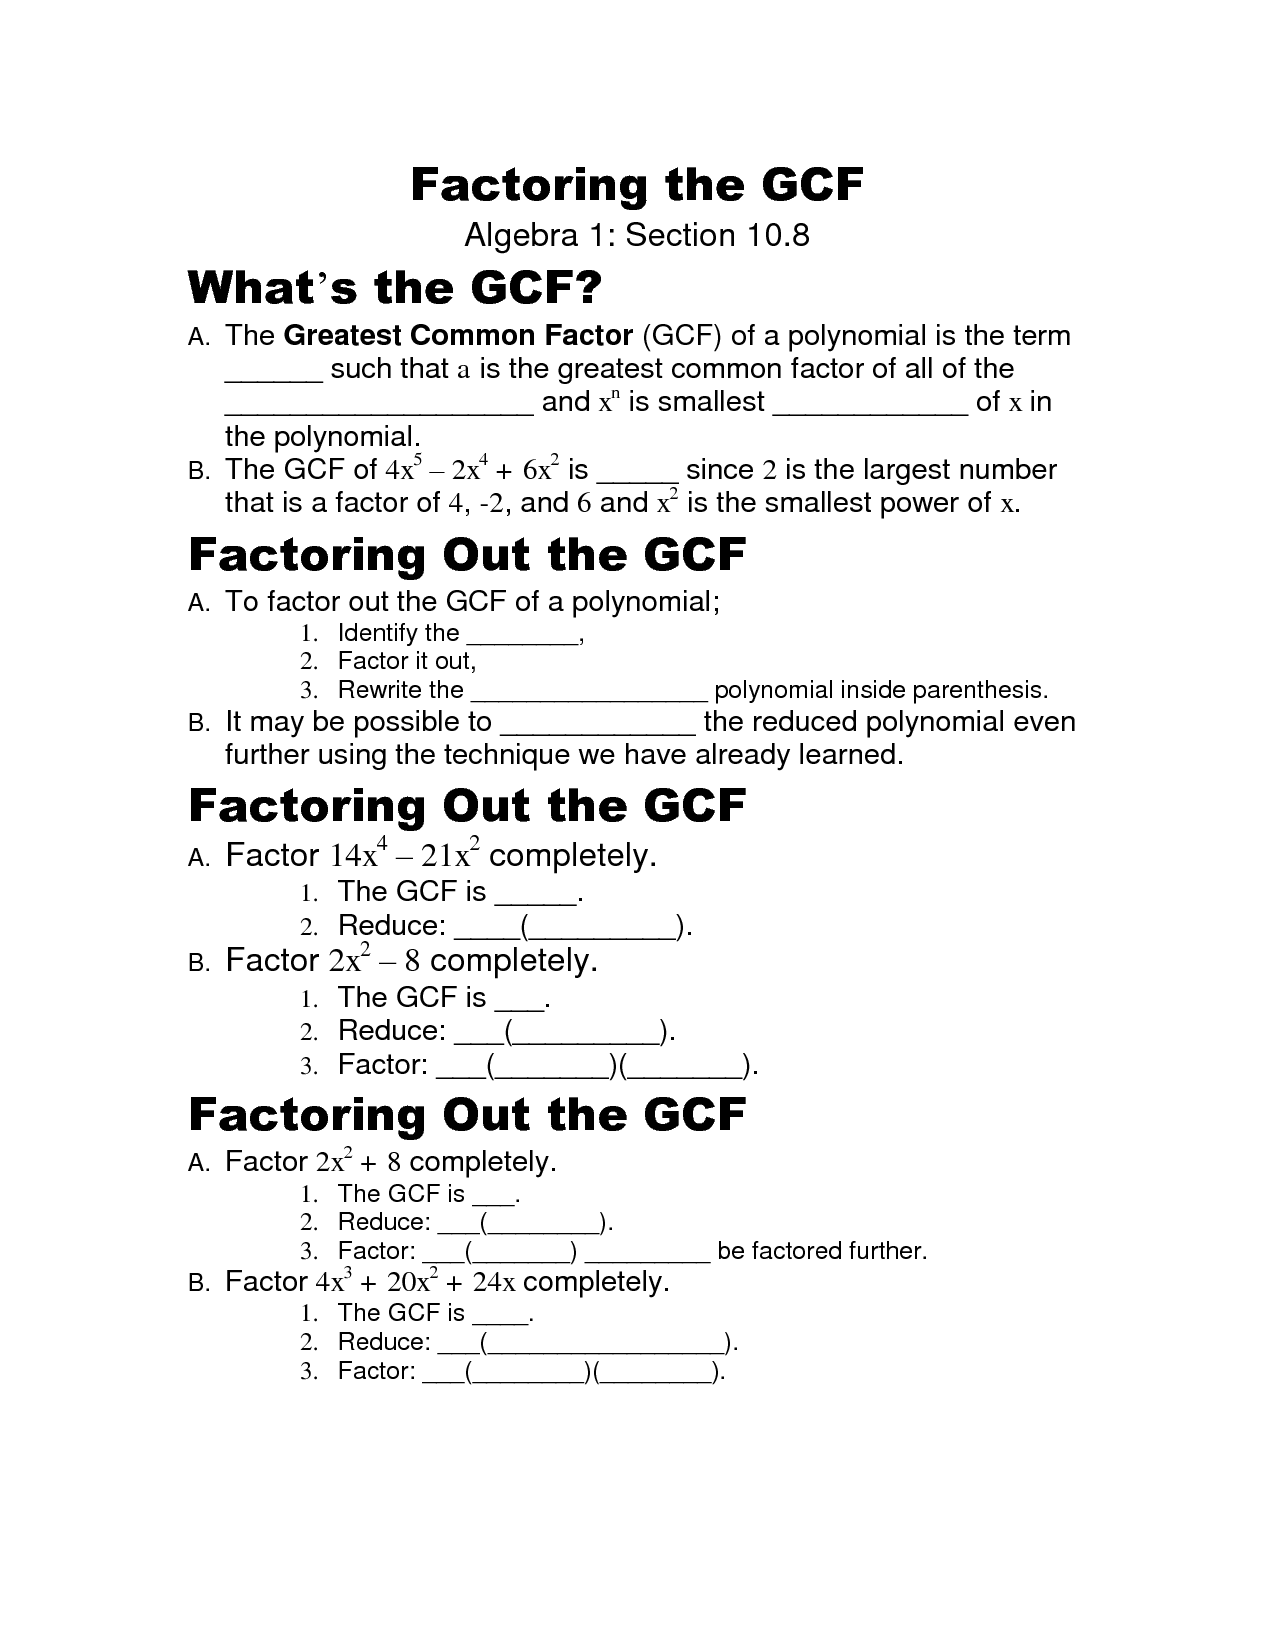 Greatest Common Factor Factoring Polynomials Worksheets Image